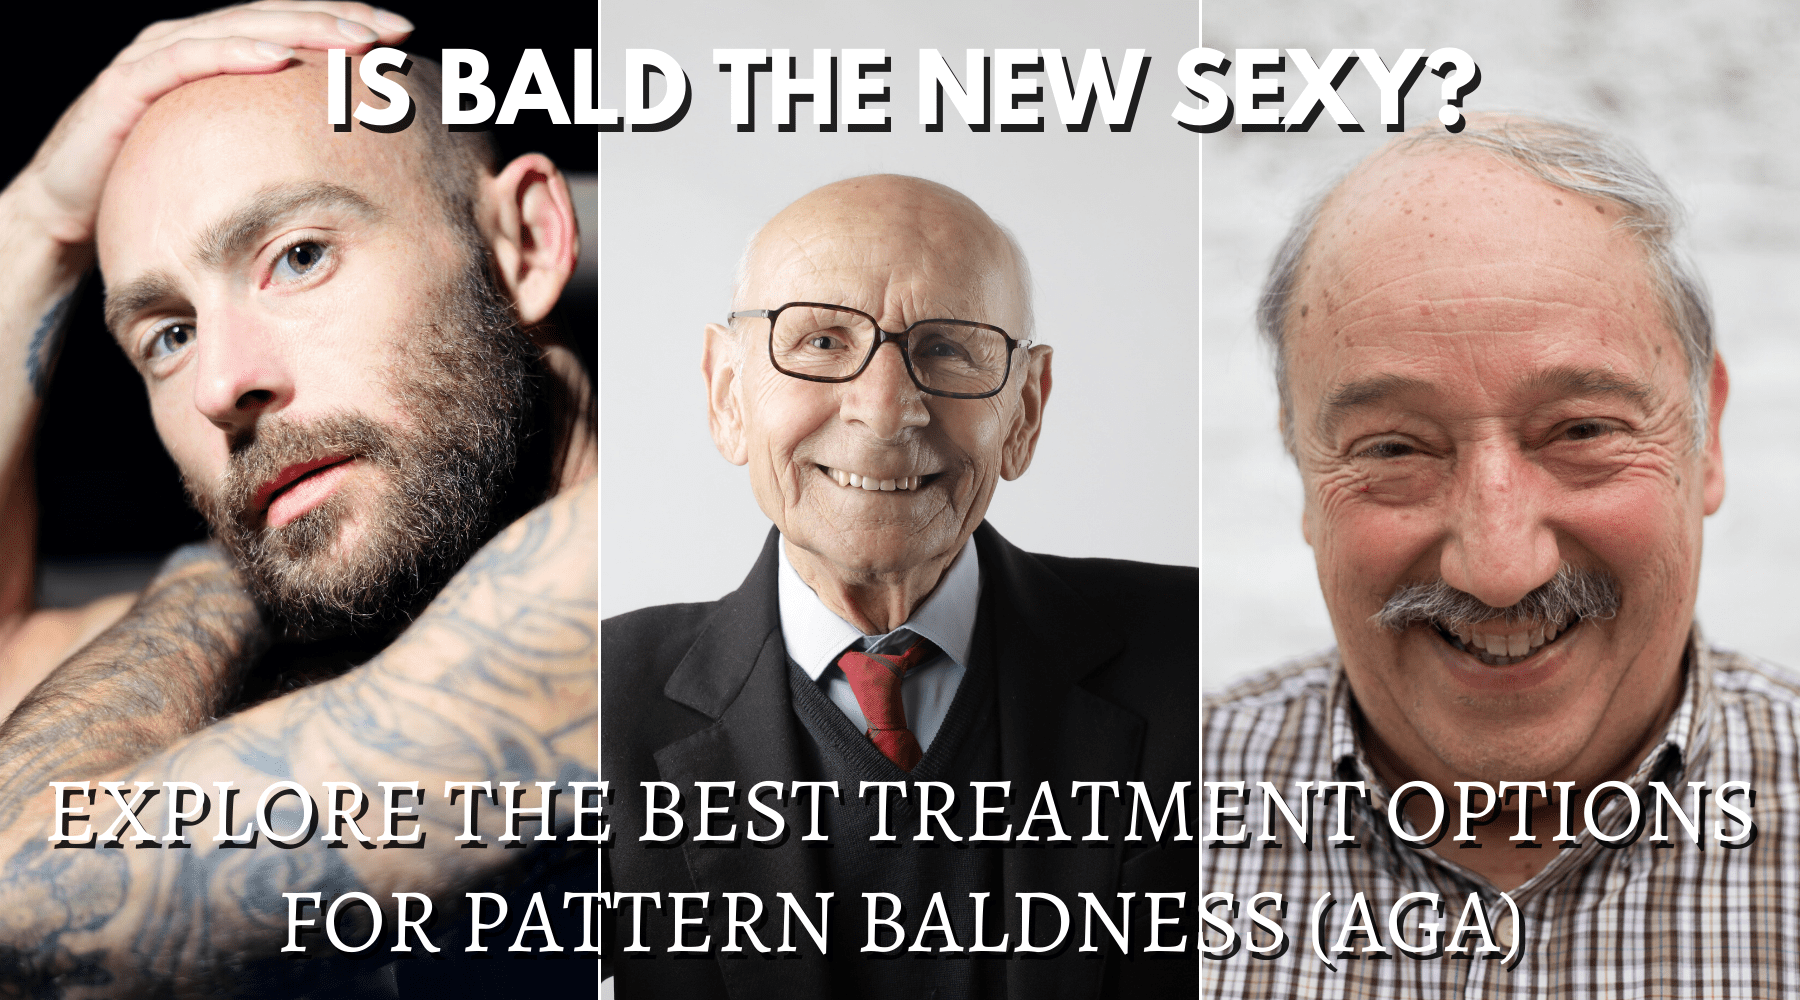 How to reverse baldness and What are the Best Treatment Options for Androgenetic Alopecia (Male & Female Pattern Hair loss)?